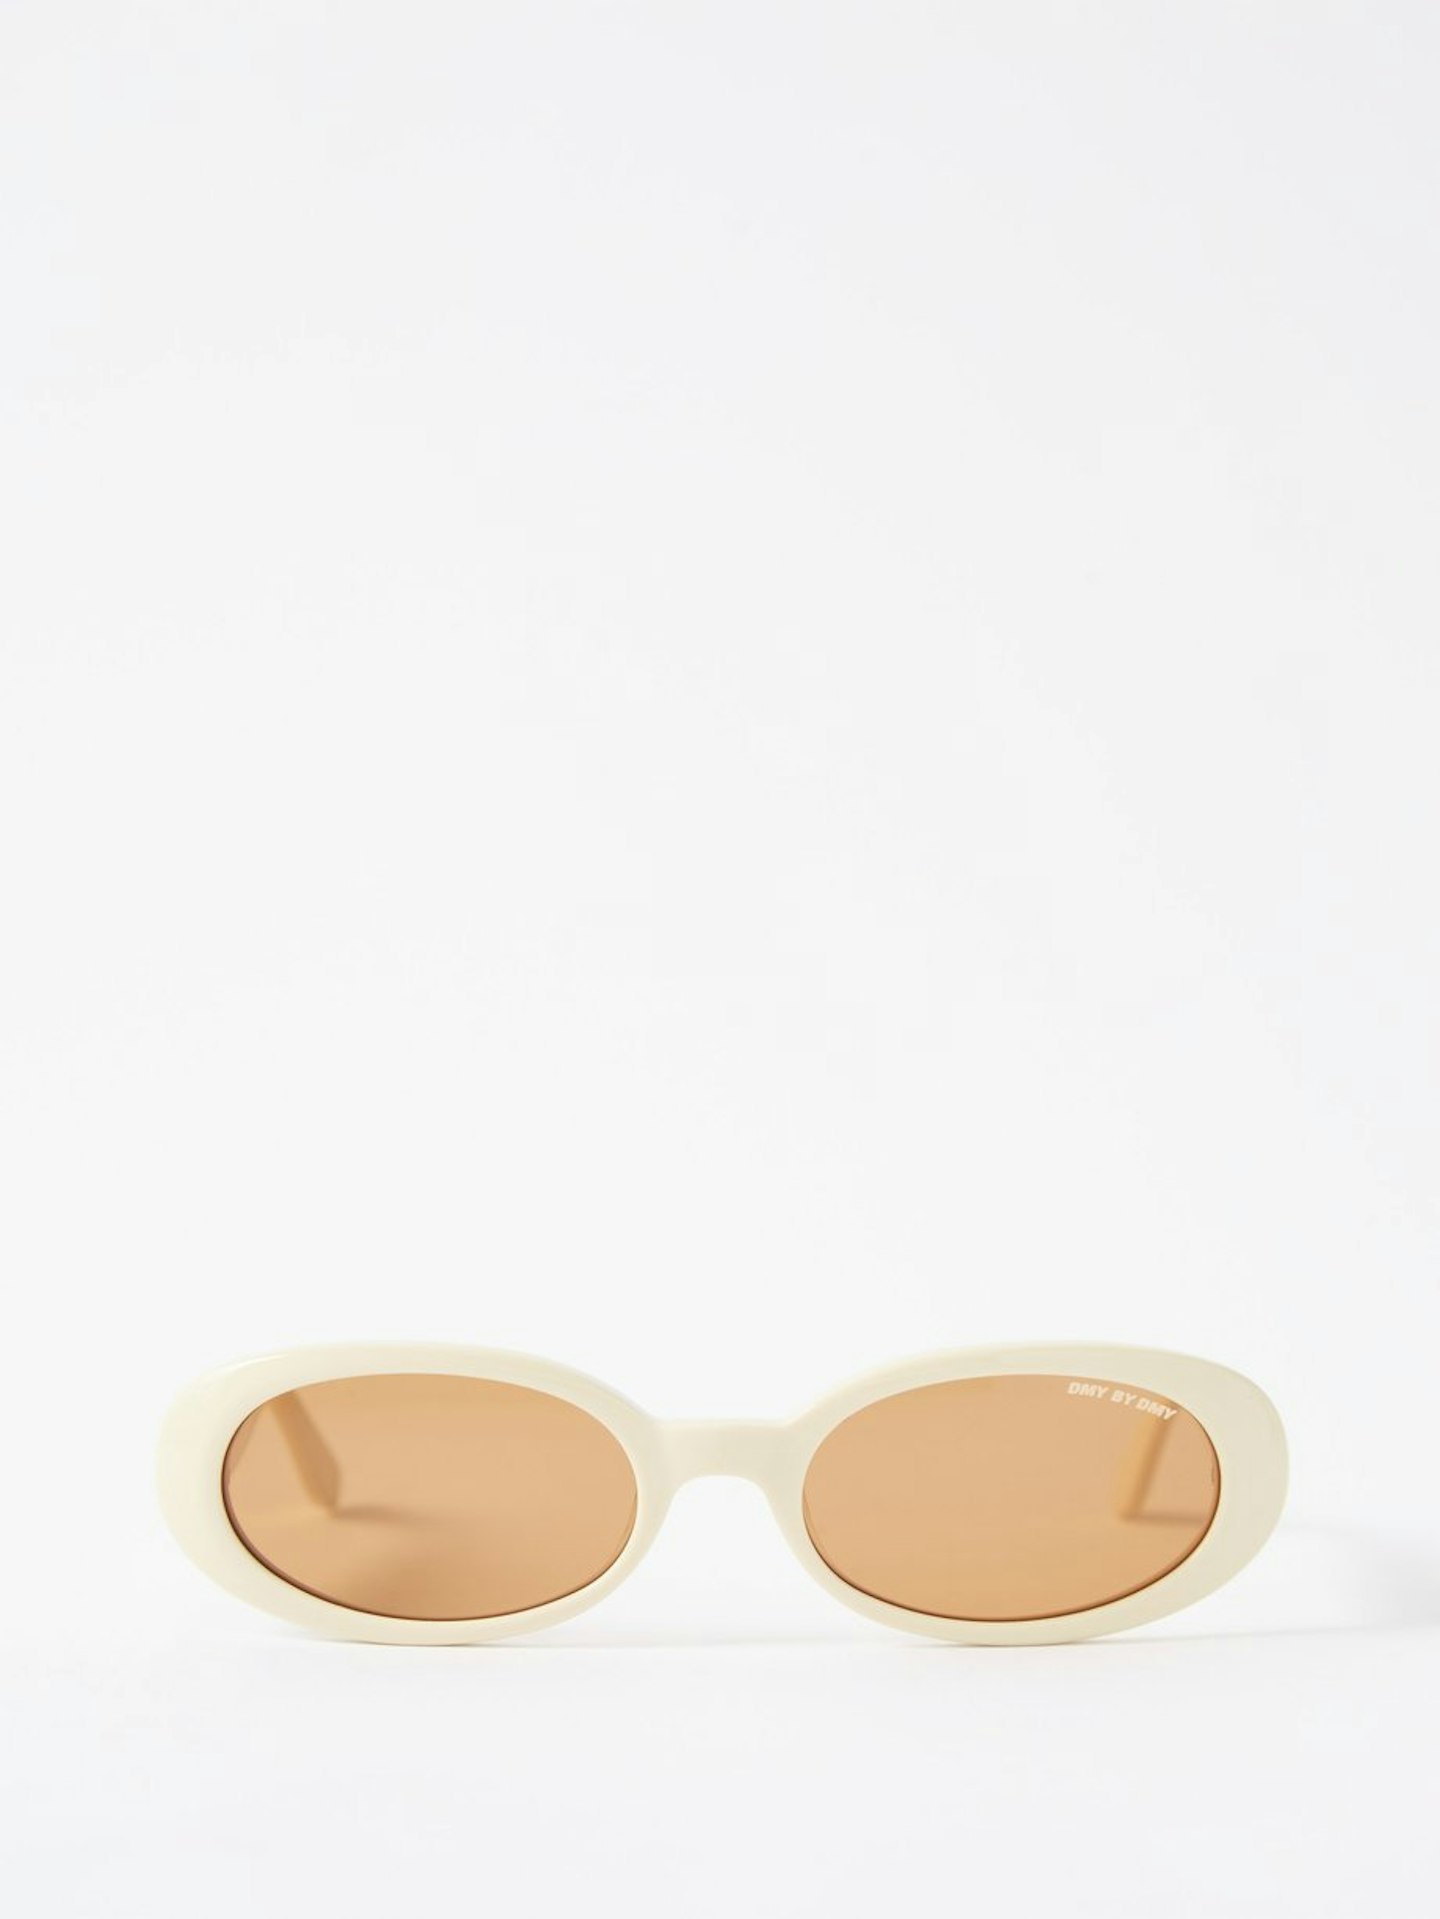 DMY By DMY, Valentina Oval Acetate Sunglasses